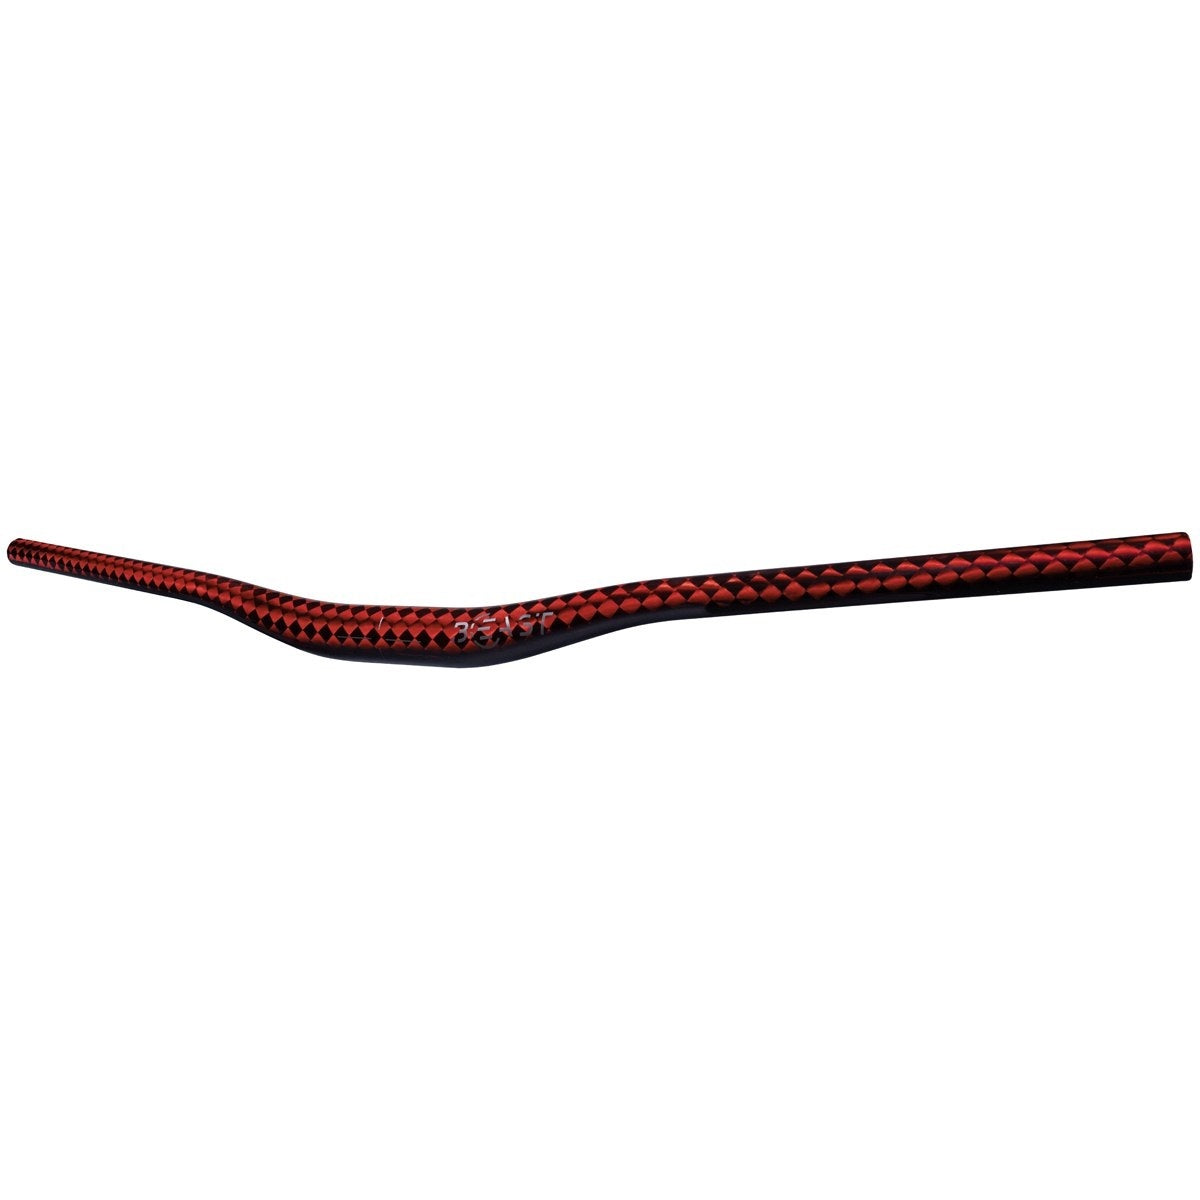 RISER BAR 35 SQUARE Red - Beast Components